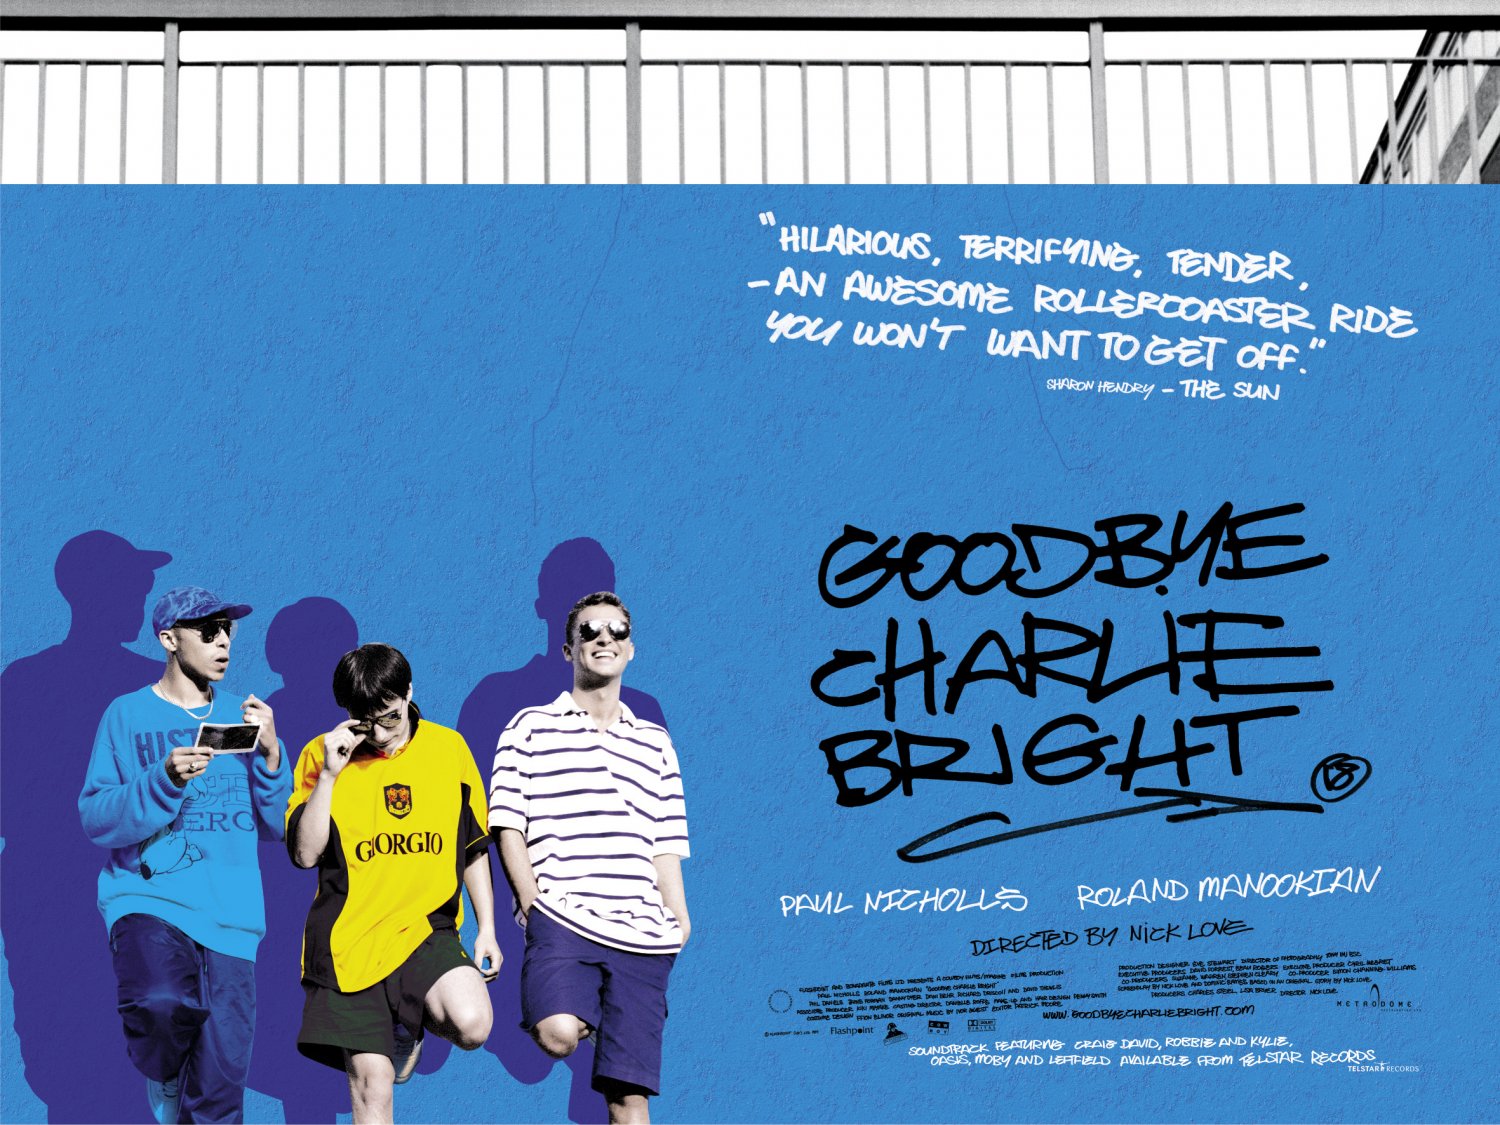 Extra Large Movie Poster Image for Goodbye Charlie Bright 